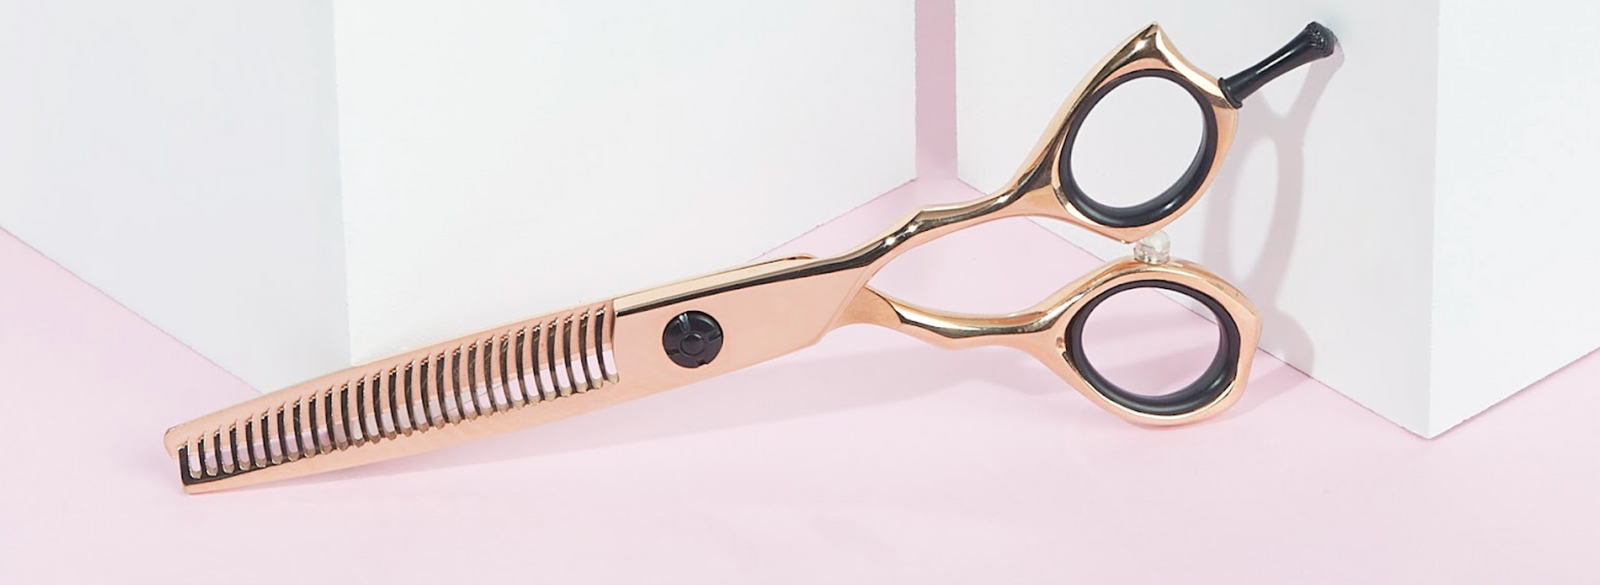 Q: Is there a difference between getting a razor cut and a scissors cut?